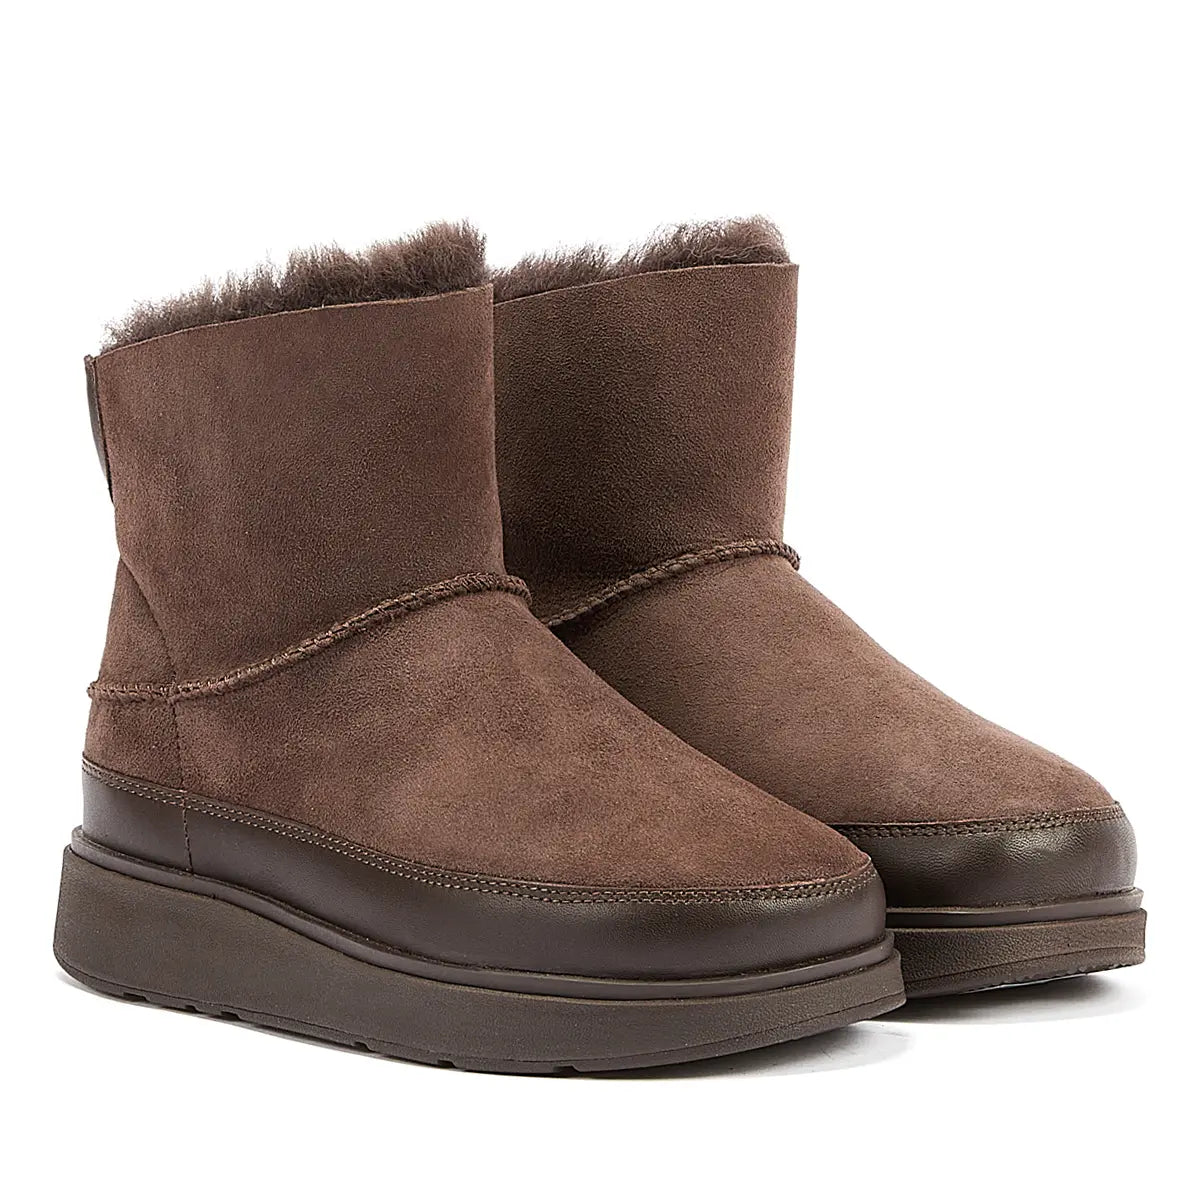 Fitflop Shearling Women’s Chocolate Boots